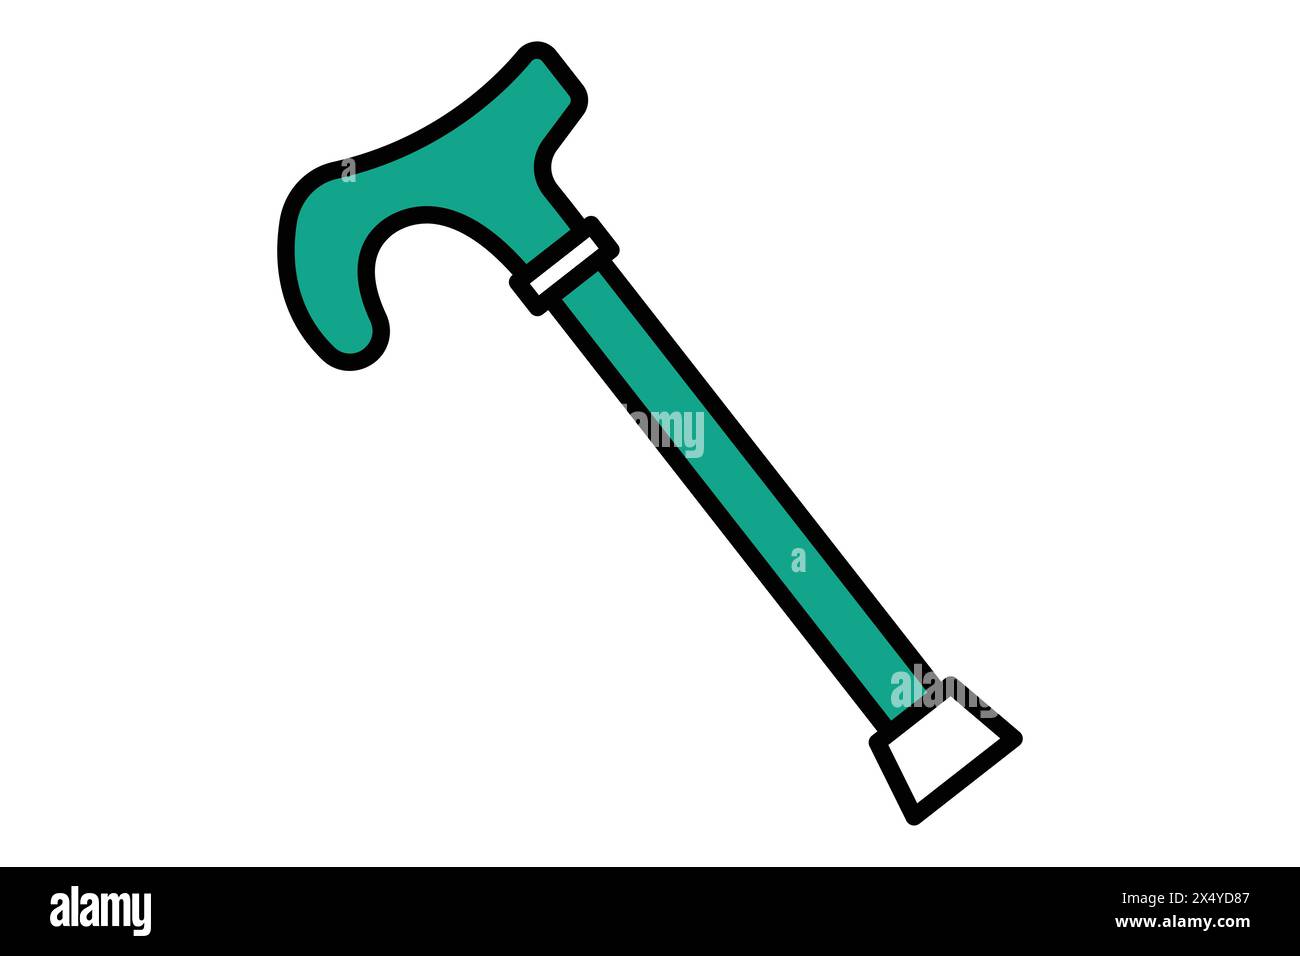 walking cane icon. icon related to elderly. flat line icon style. old age element illustration Stock Vector